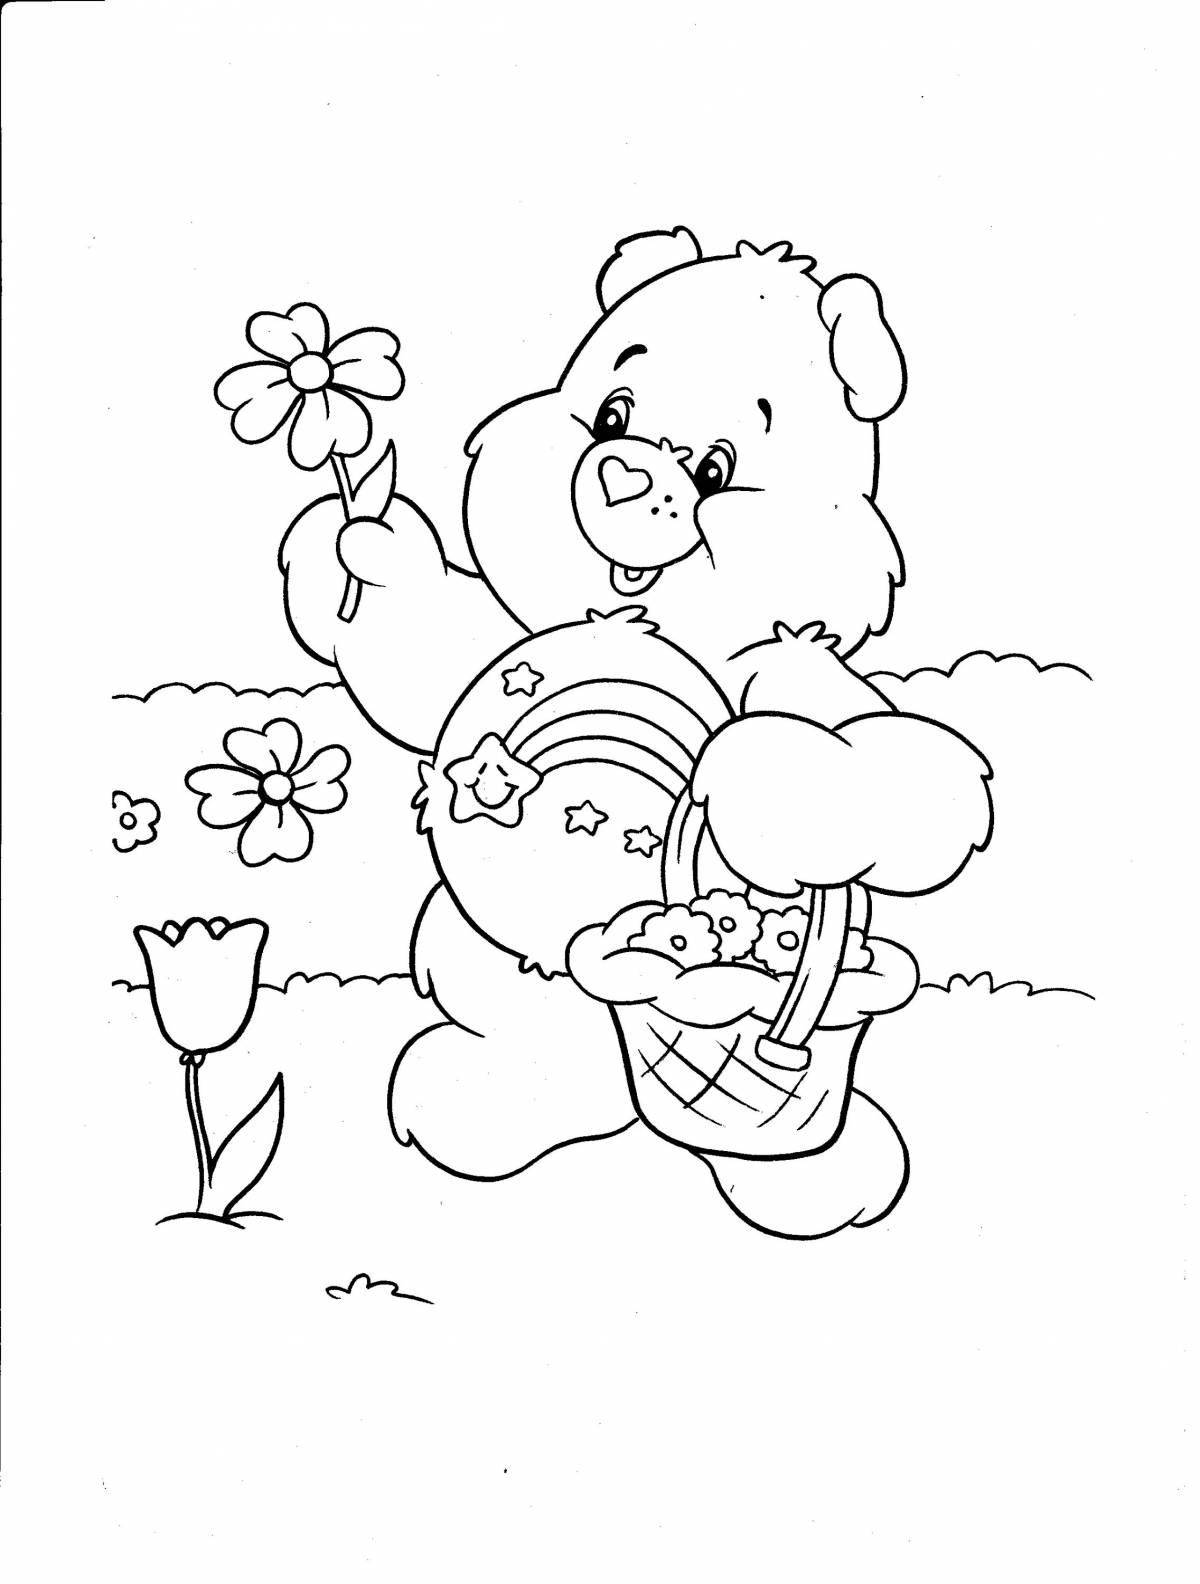 Animated bear with flowers